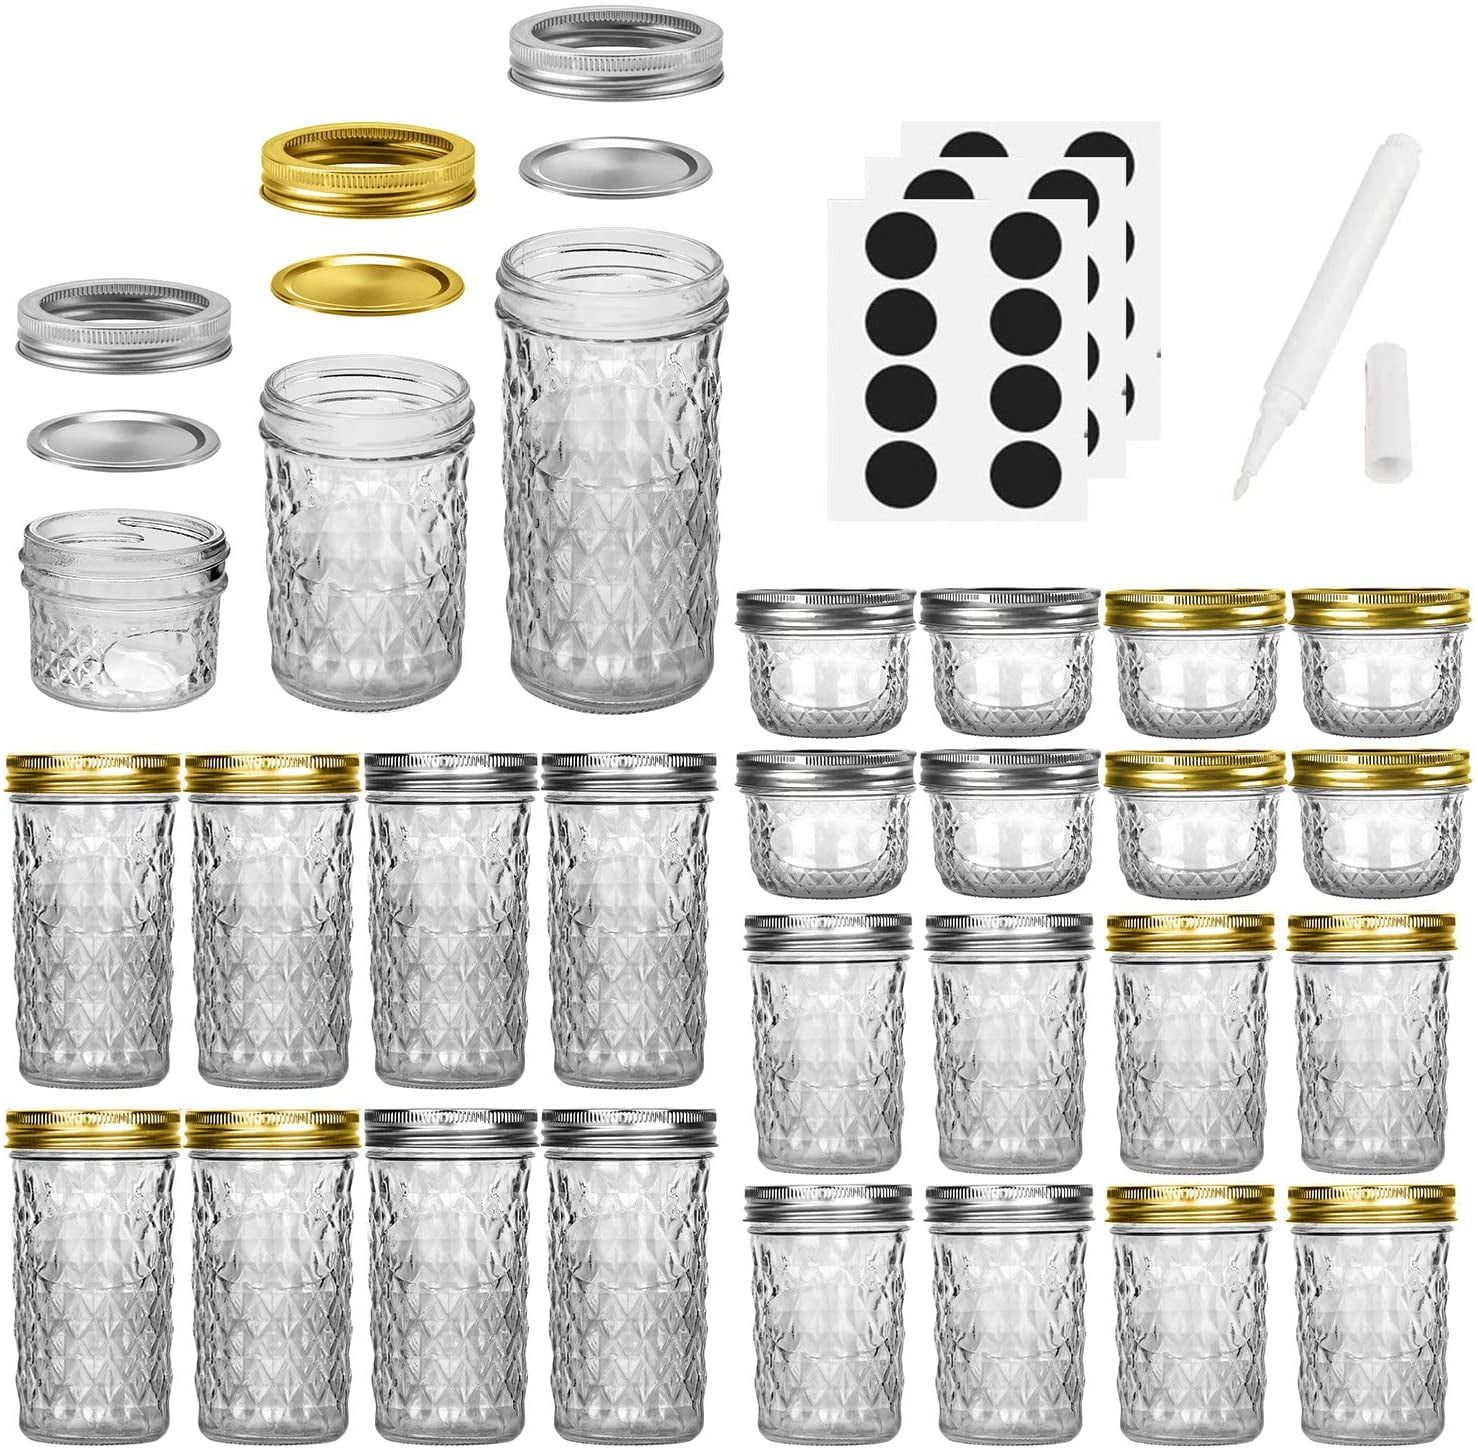 4OZ Canning Jelly With Regular Silver Lids And Bands DIY Mason Jars Ideal Jam 